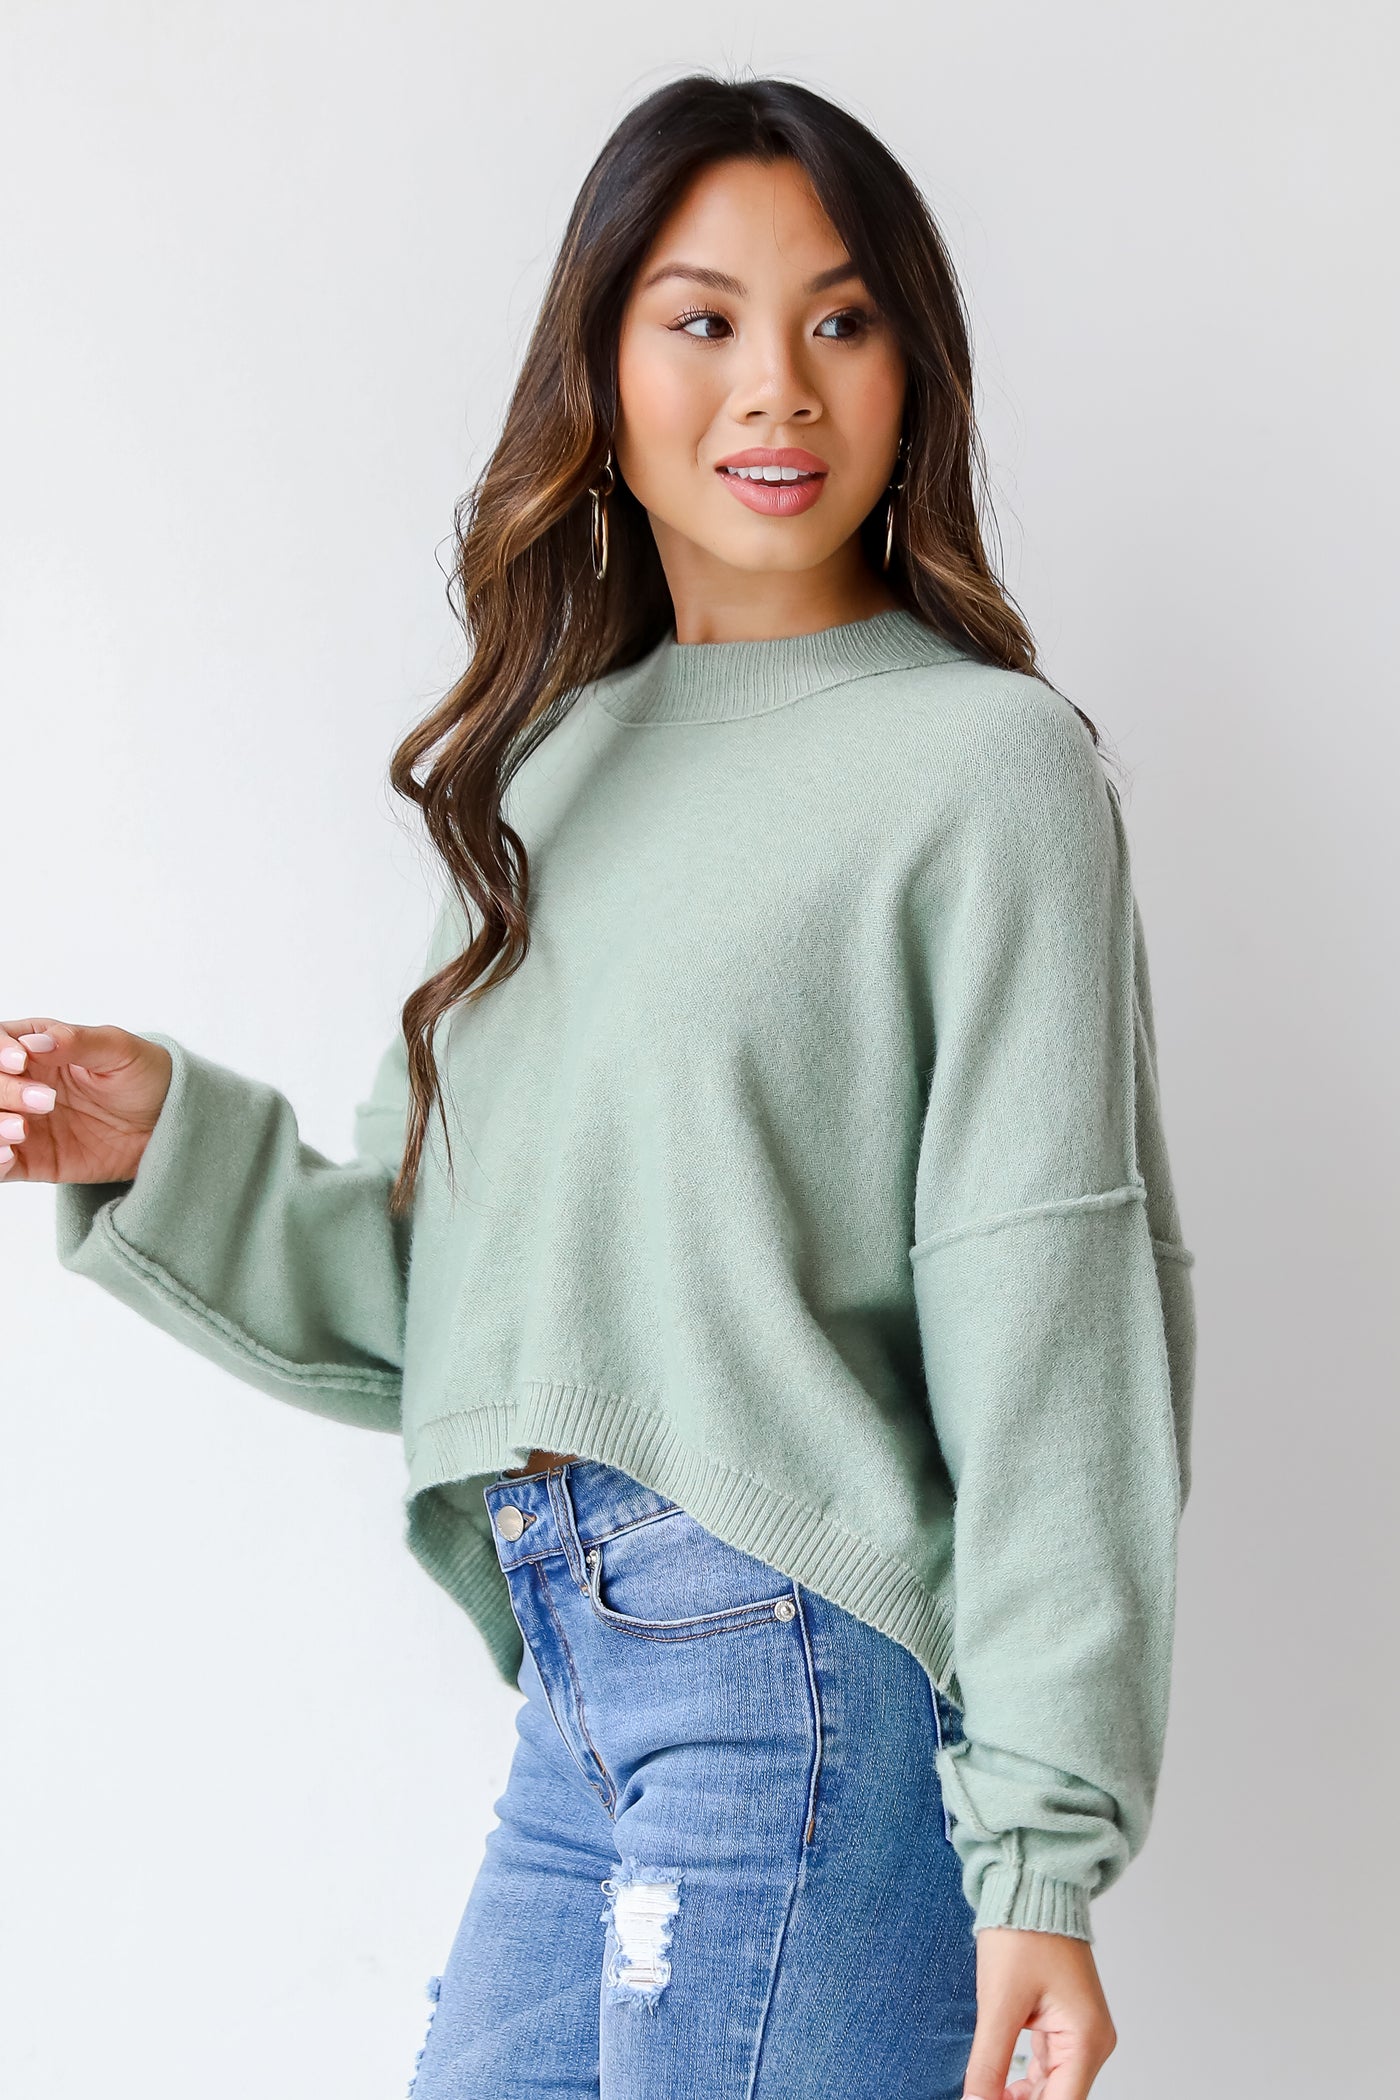 sage sweater side view